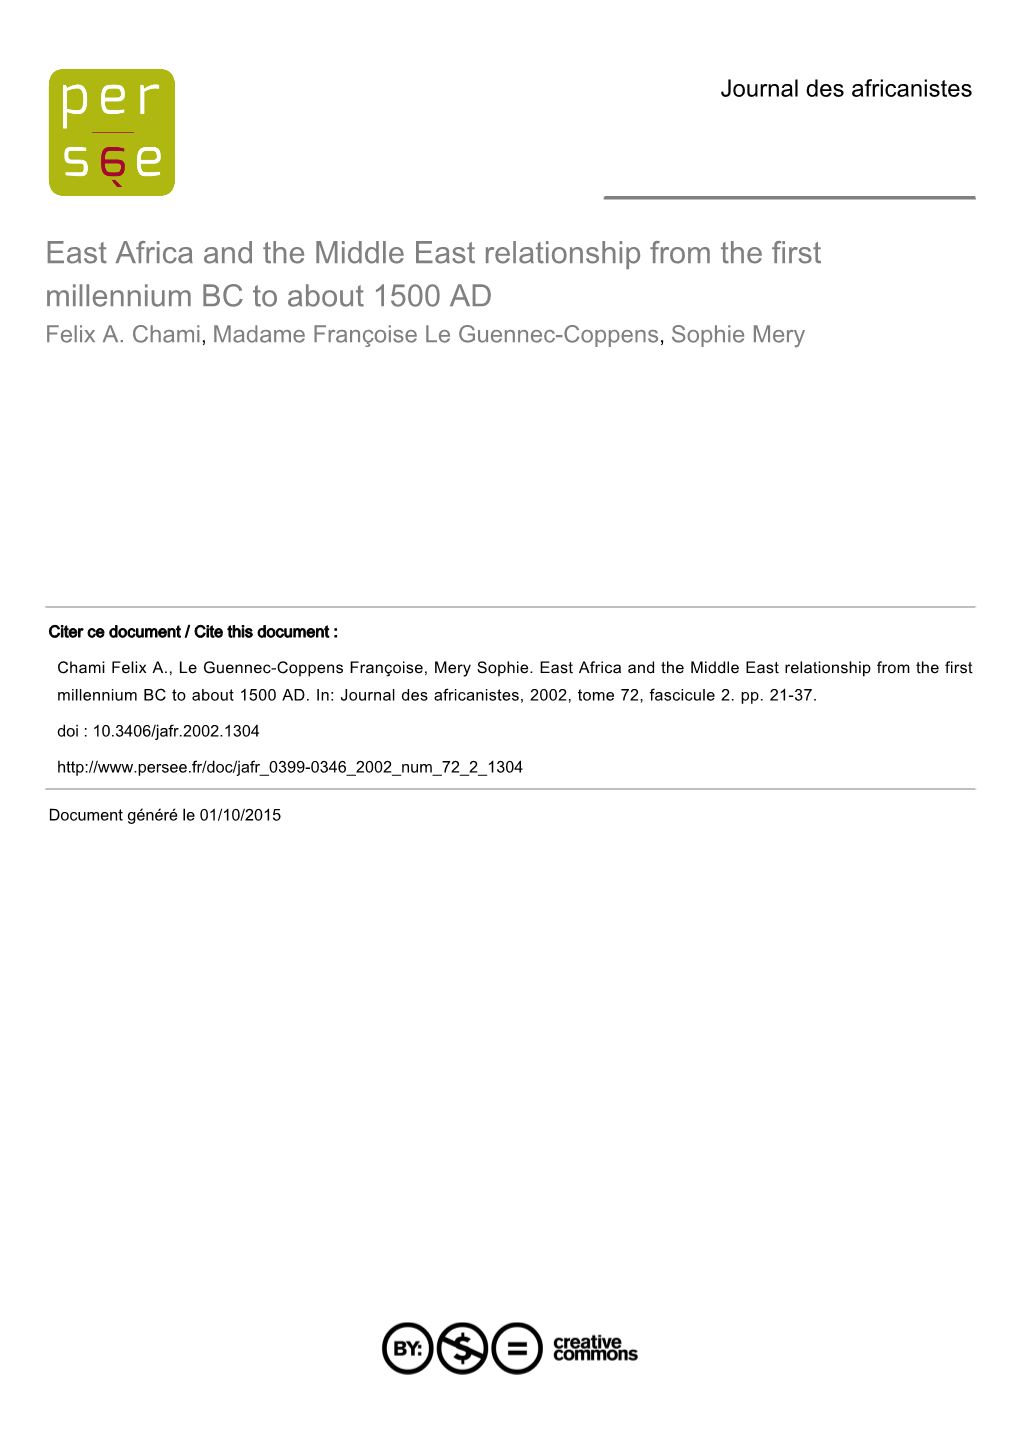 East Africa and the Middle East Relationship from the First Millennium BC to About 1500 AD Felix A